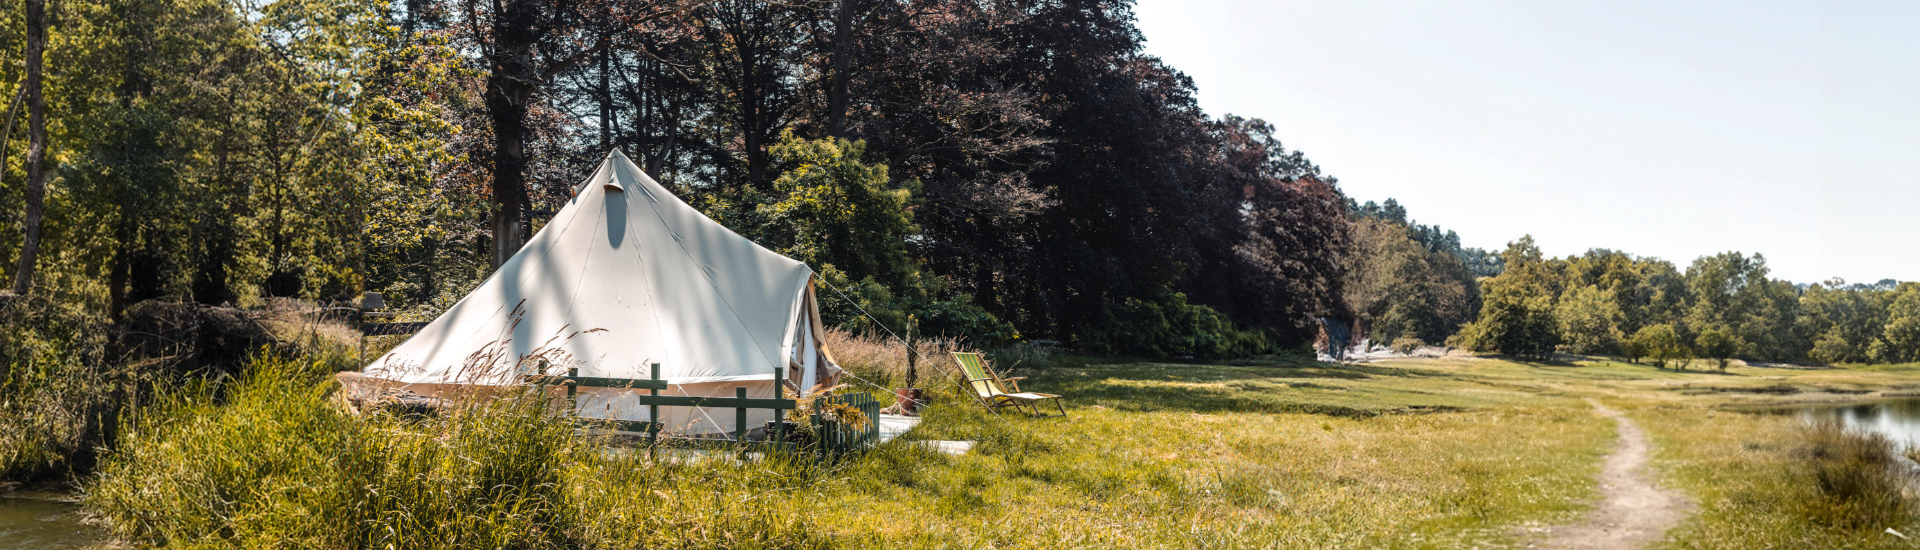 Discover the Original Sibley Bell Tent